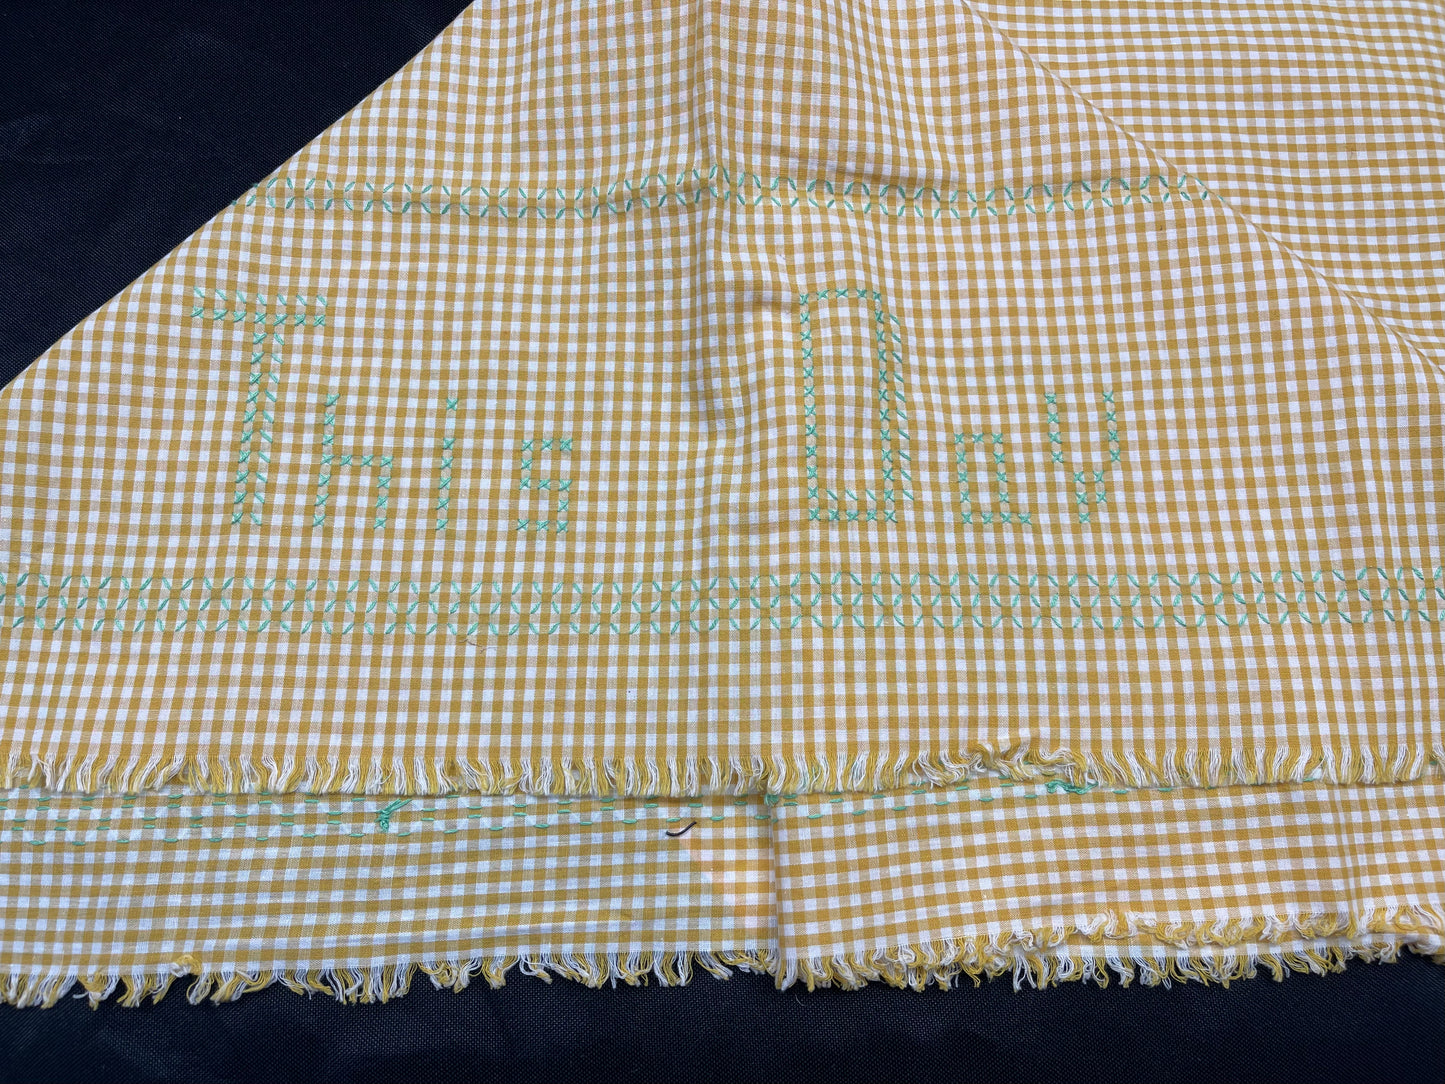 Yellow Gingham Tablecloth with Green Cross Stitch